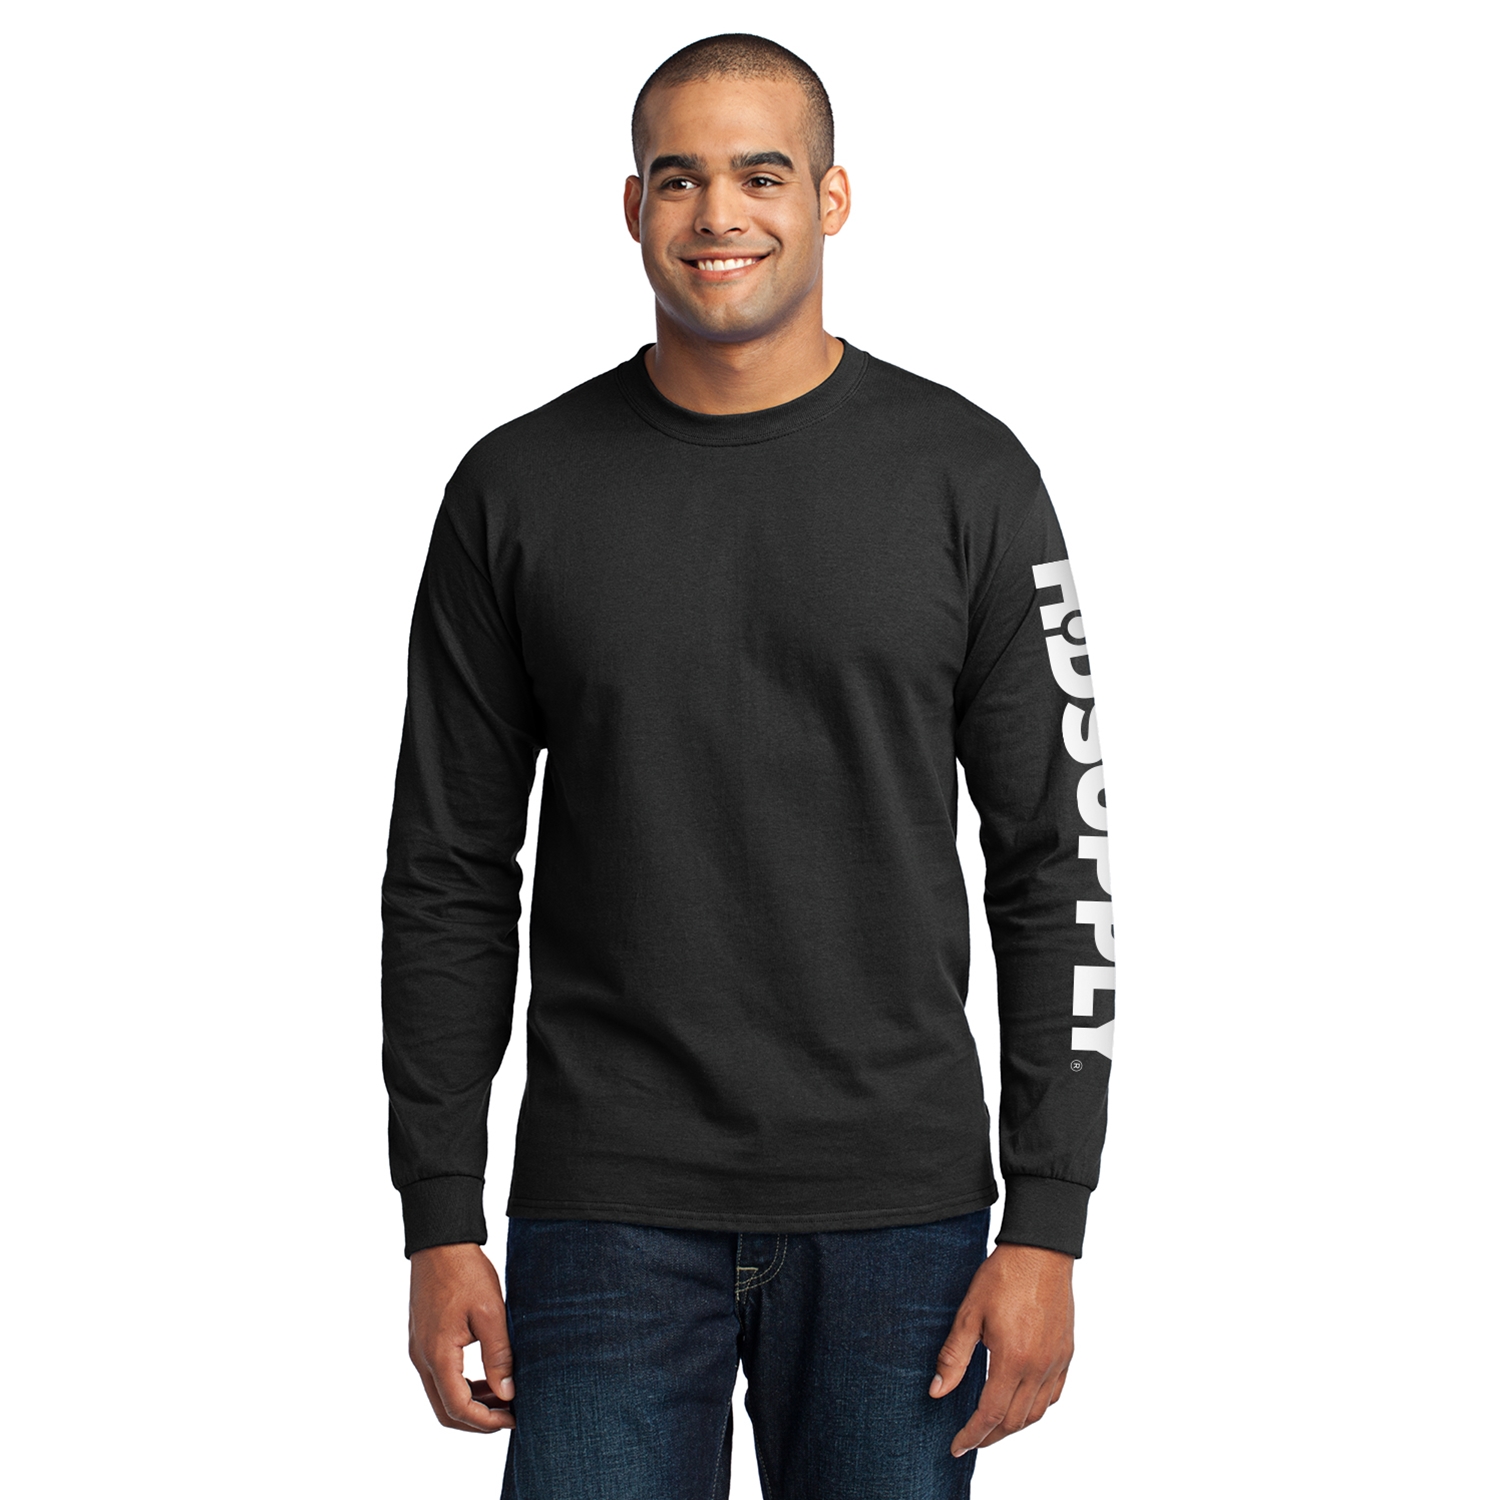 HD Supply Branded Merchandise Store - UNISEX CLASSIC LONG SLEEVE T-SHIRT